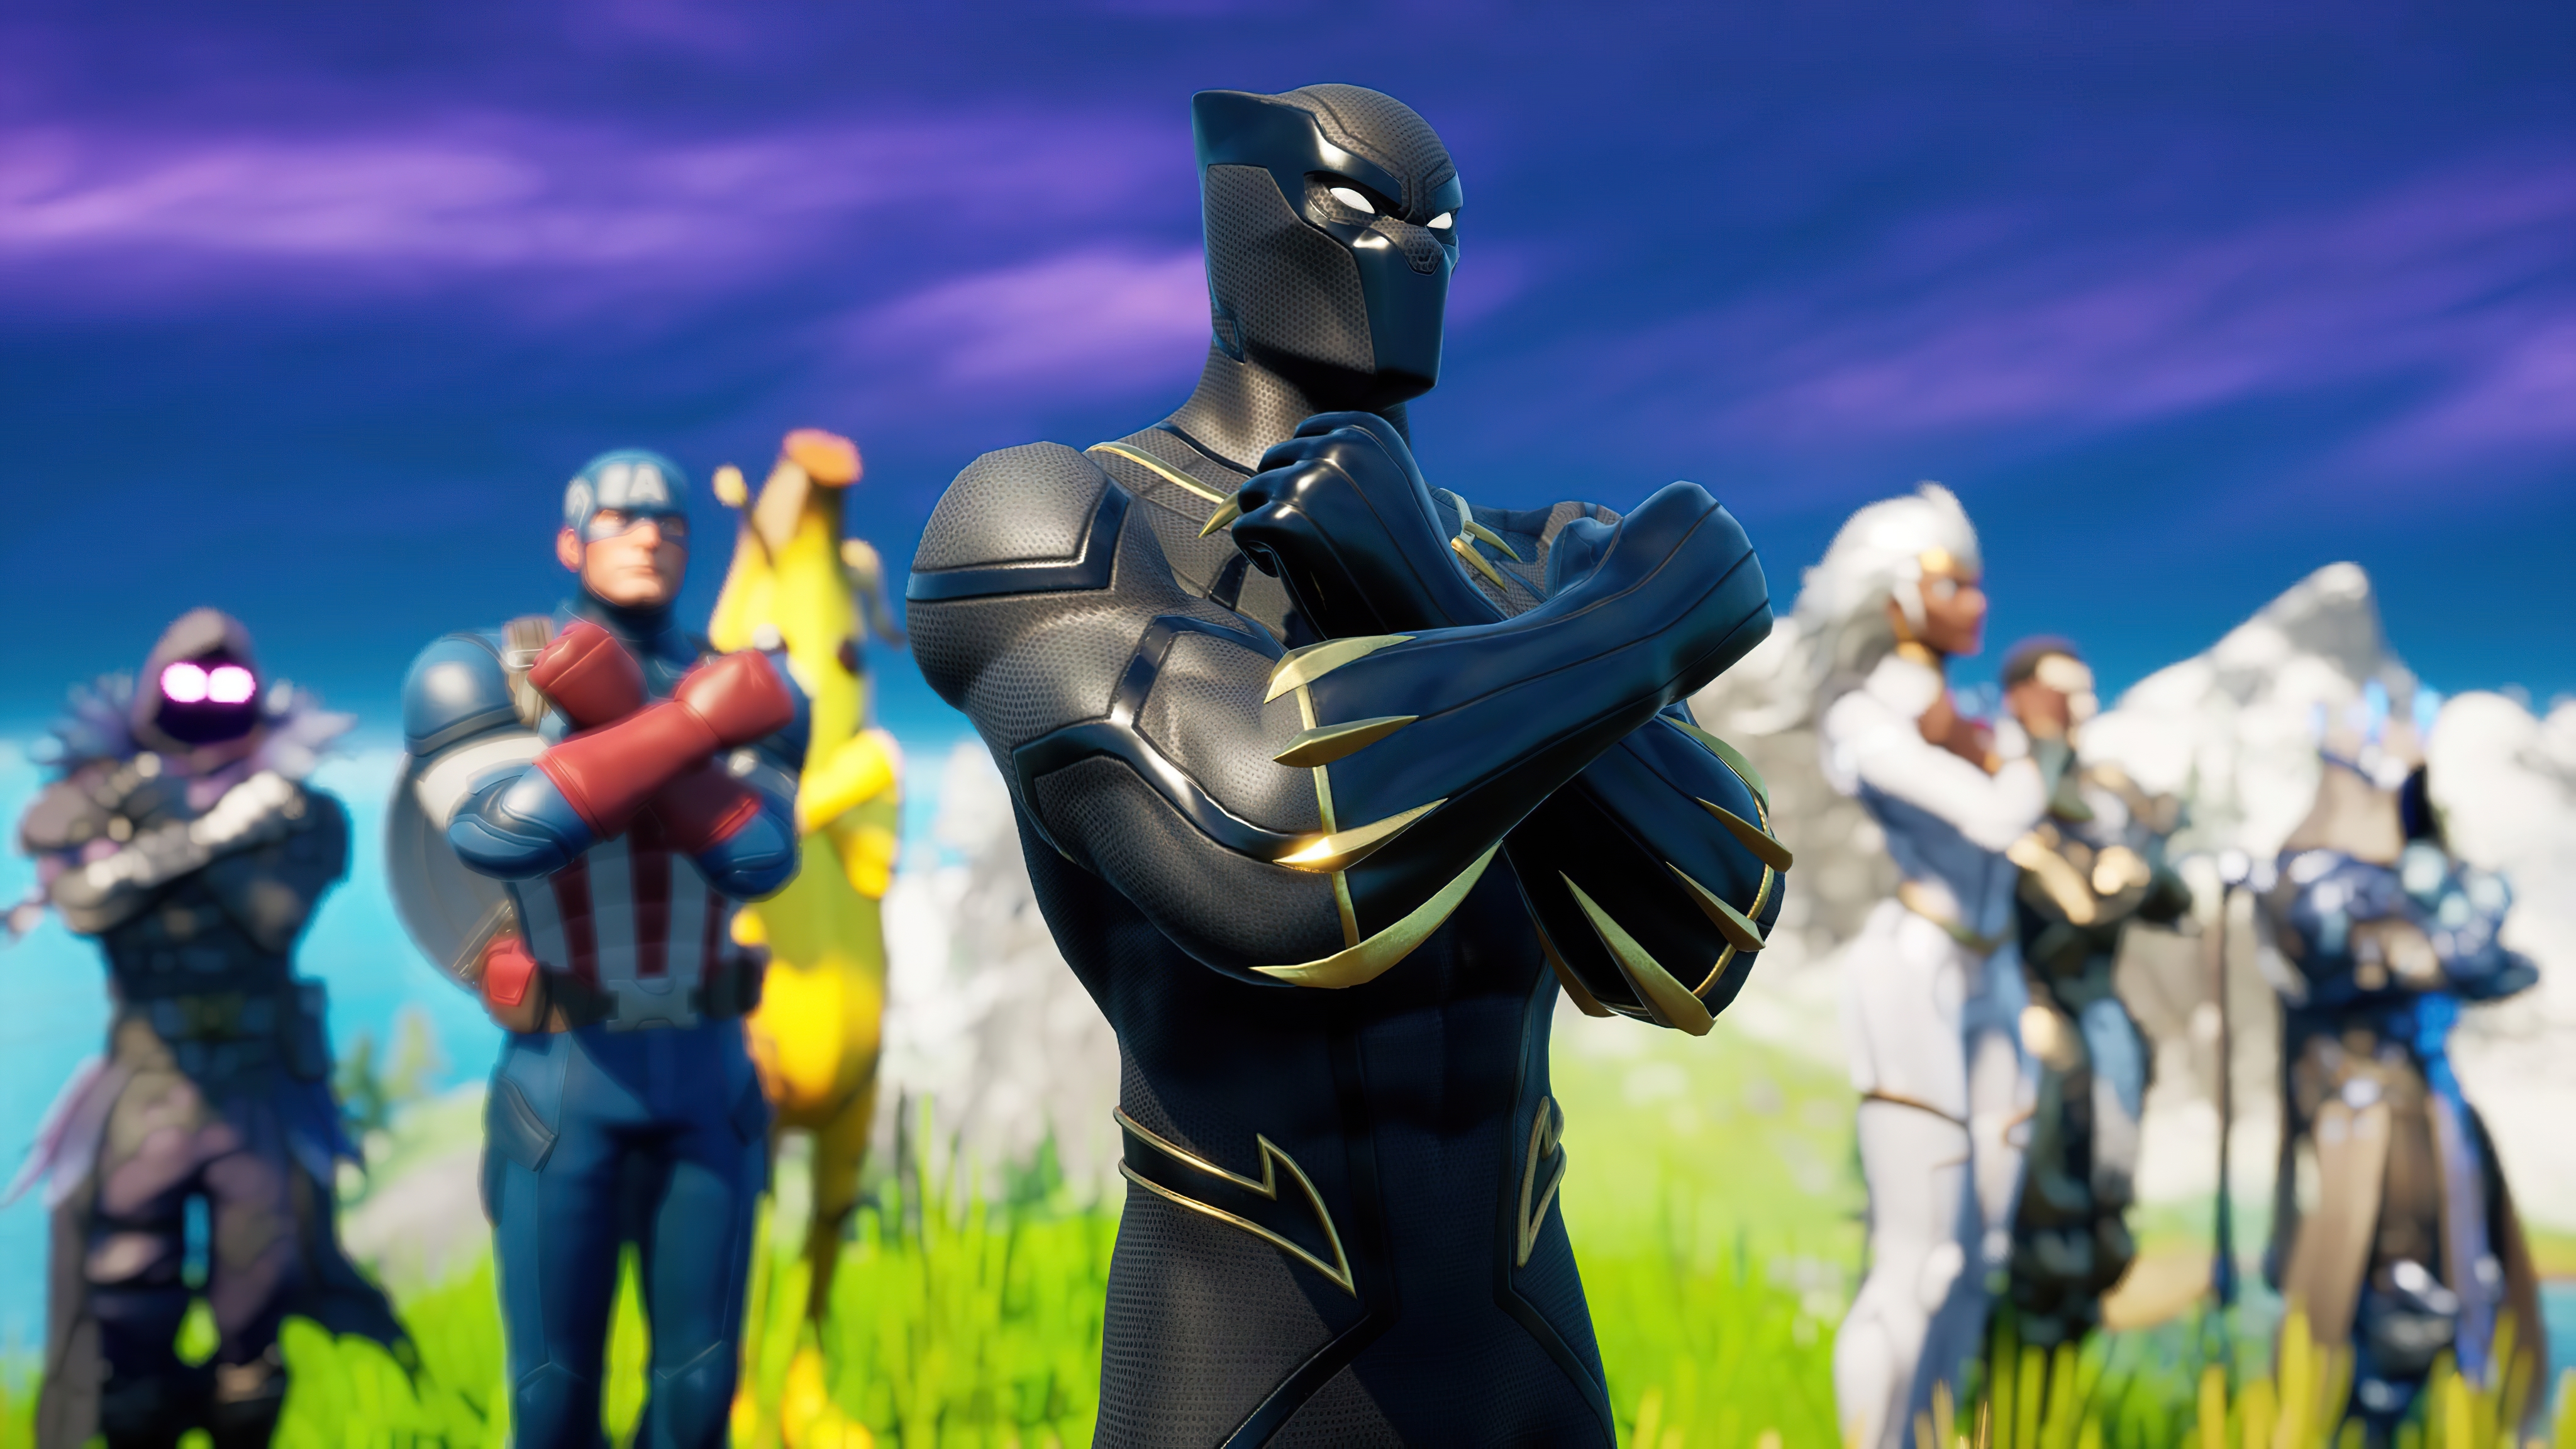 Black Panther Fortnite Wakanda Forever Wallpaper Hd Games 4k Wallpapers Images Photos And Background